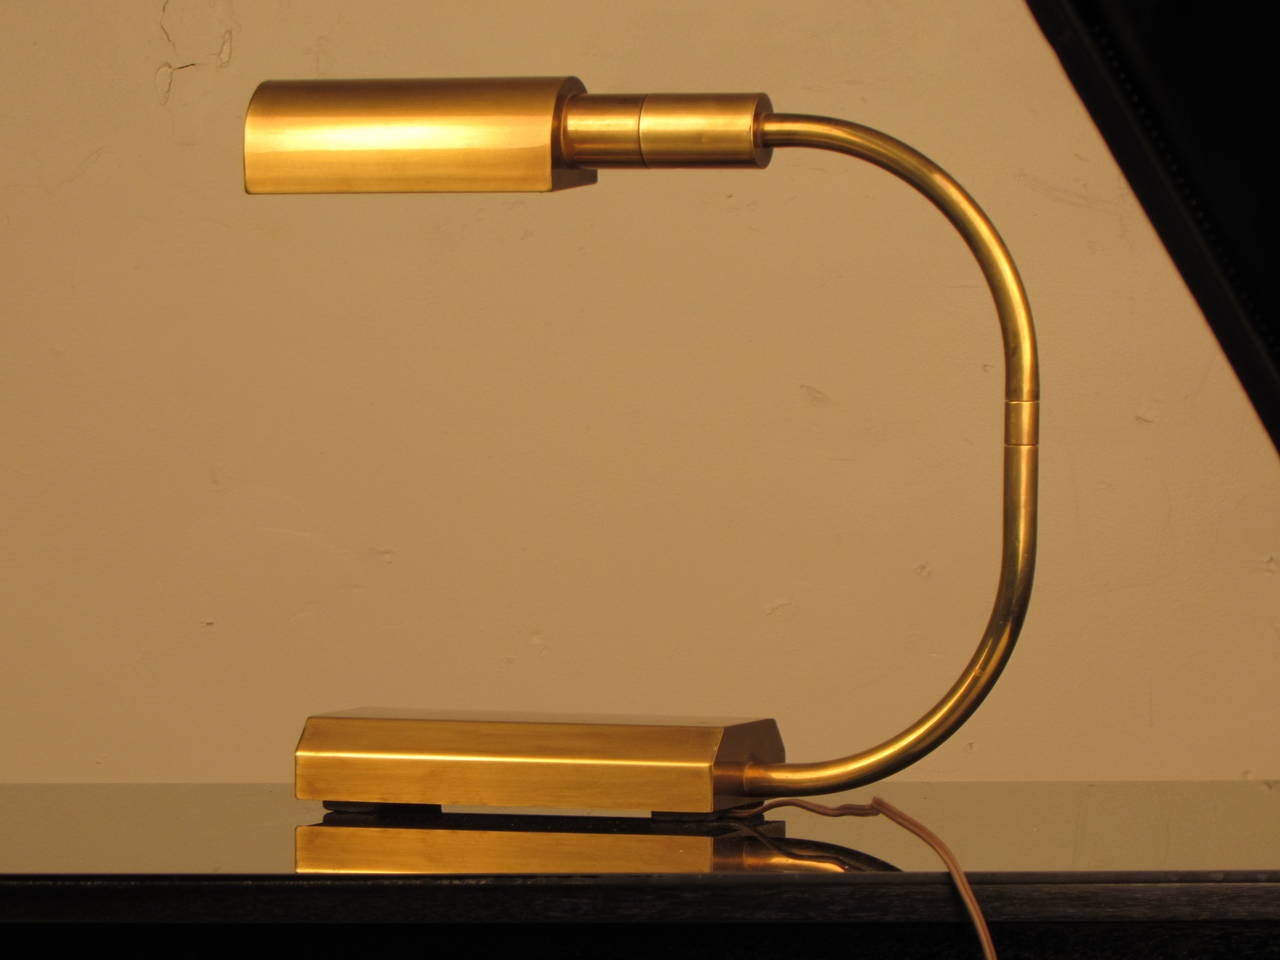 Handsome Bauhaus-inspired brass desk lamp by Chapman. Heavy, heavy, heavy and of impeccable quality! Features a pivoting arm and a pivoting head, giving you options when placing the piece. Would work well as a bedside lamp or piano lamp, also.